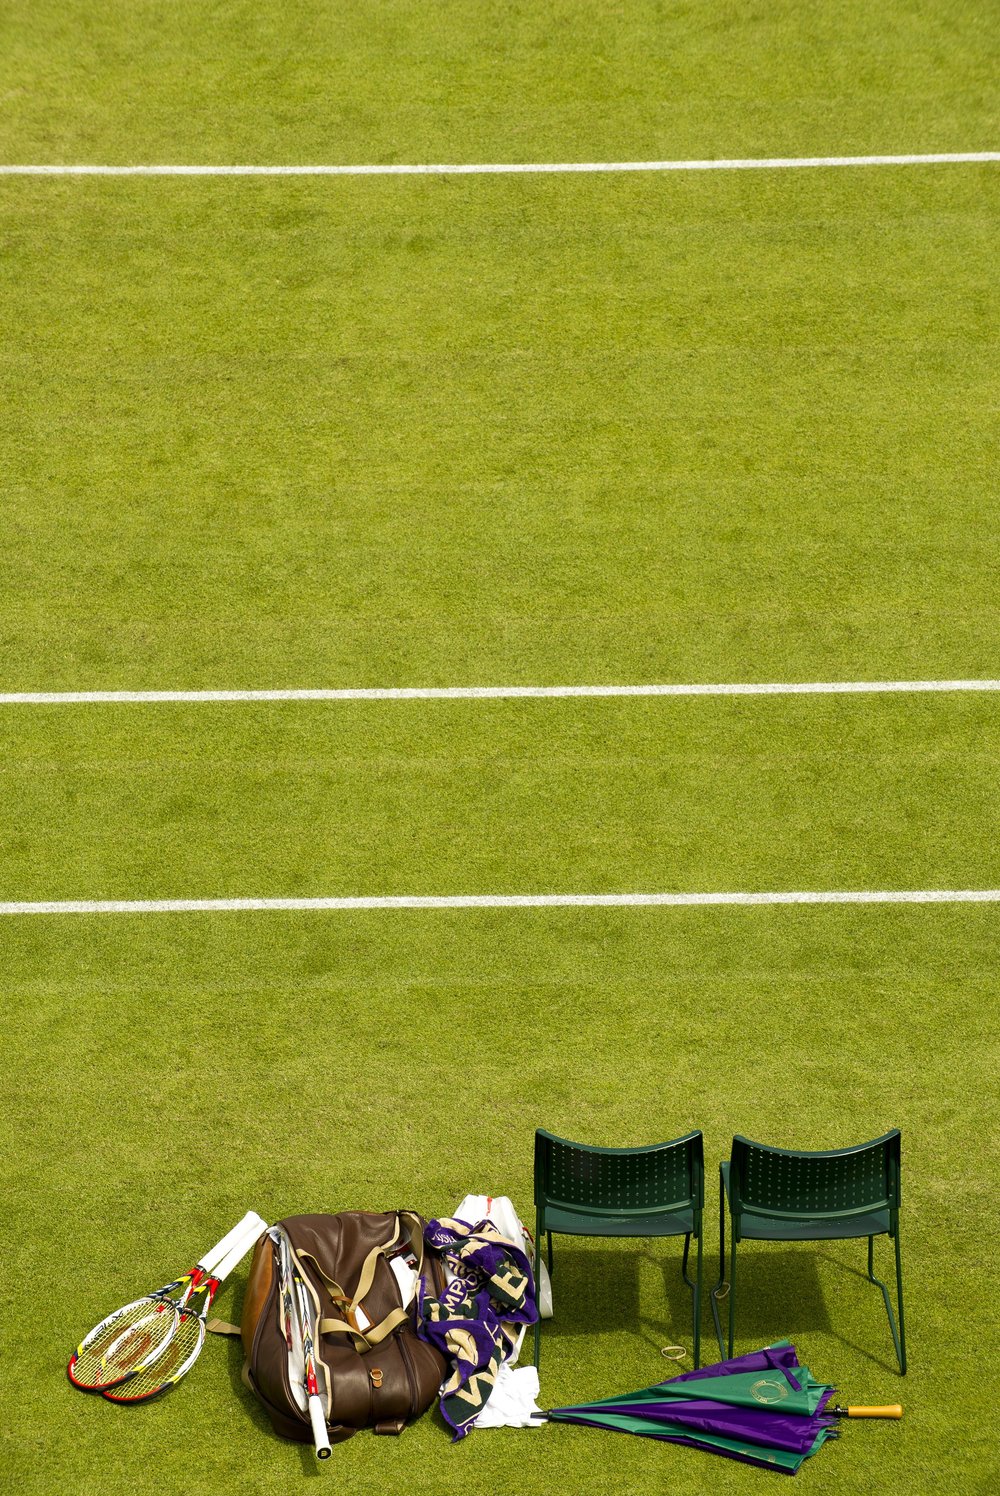 Ready for action at The Championships, Wimbledon.jpg